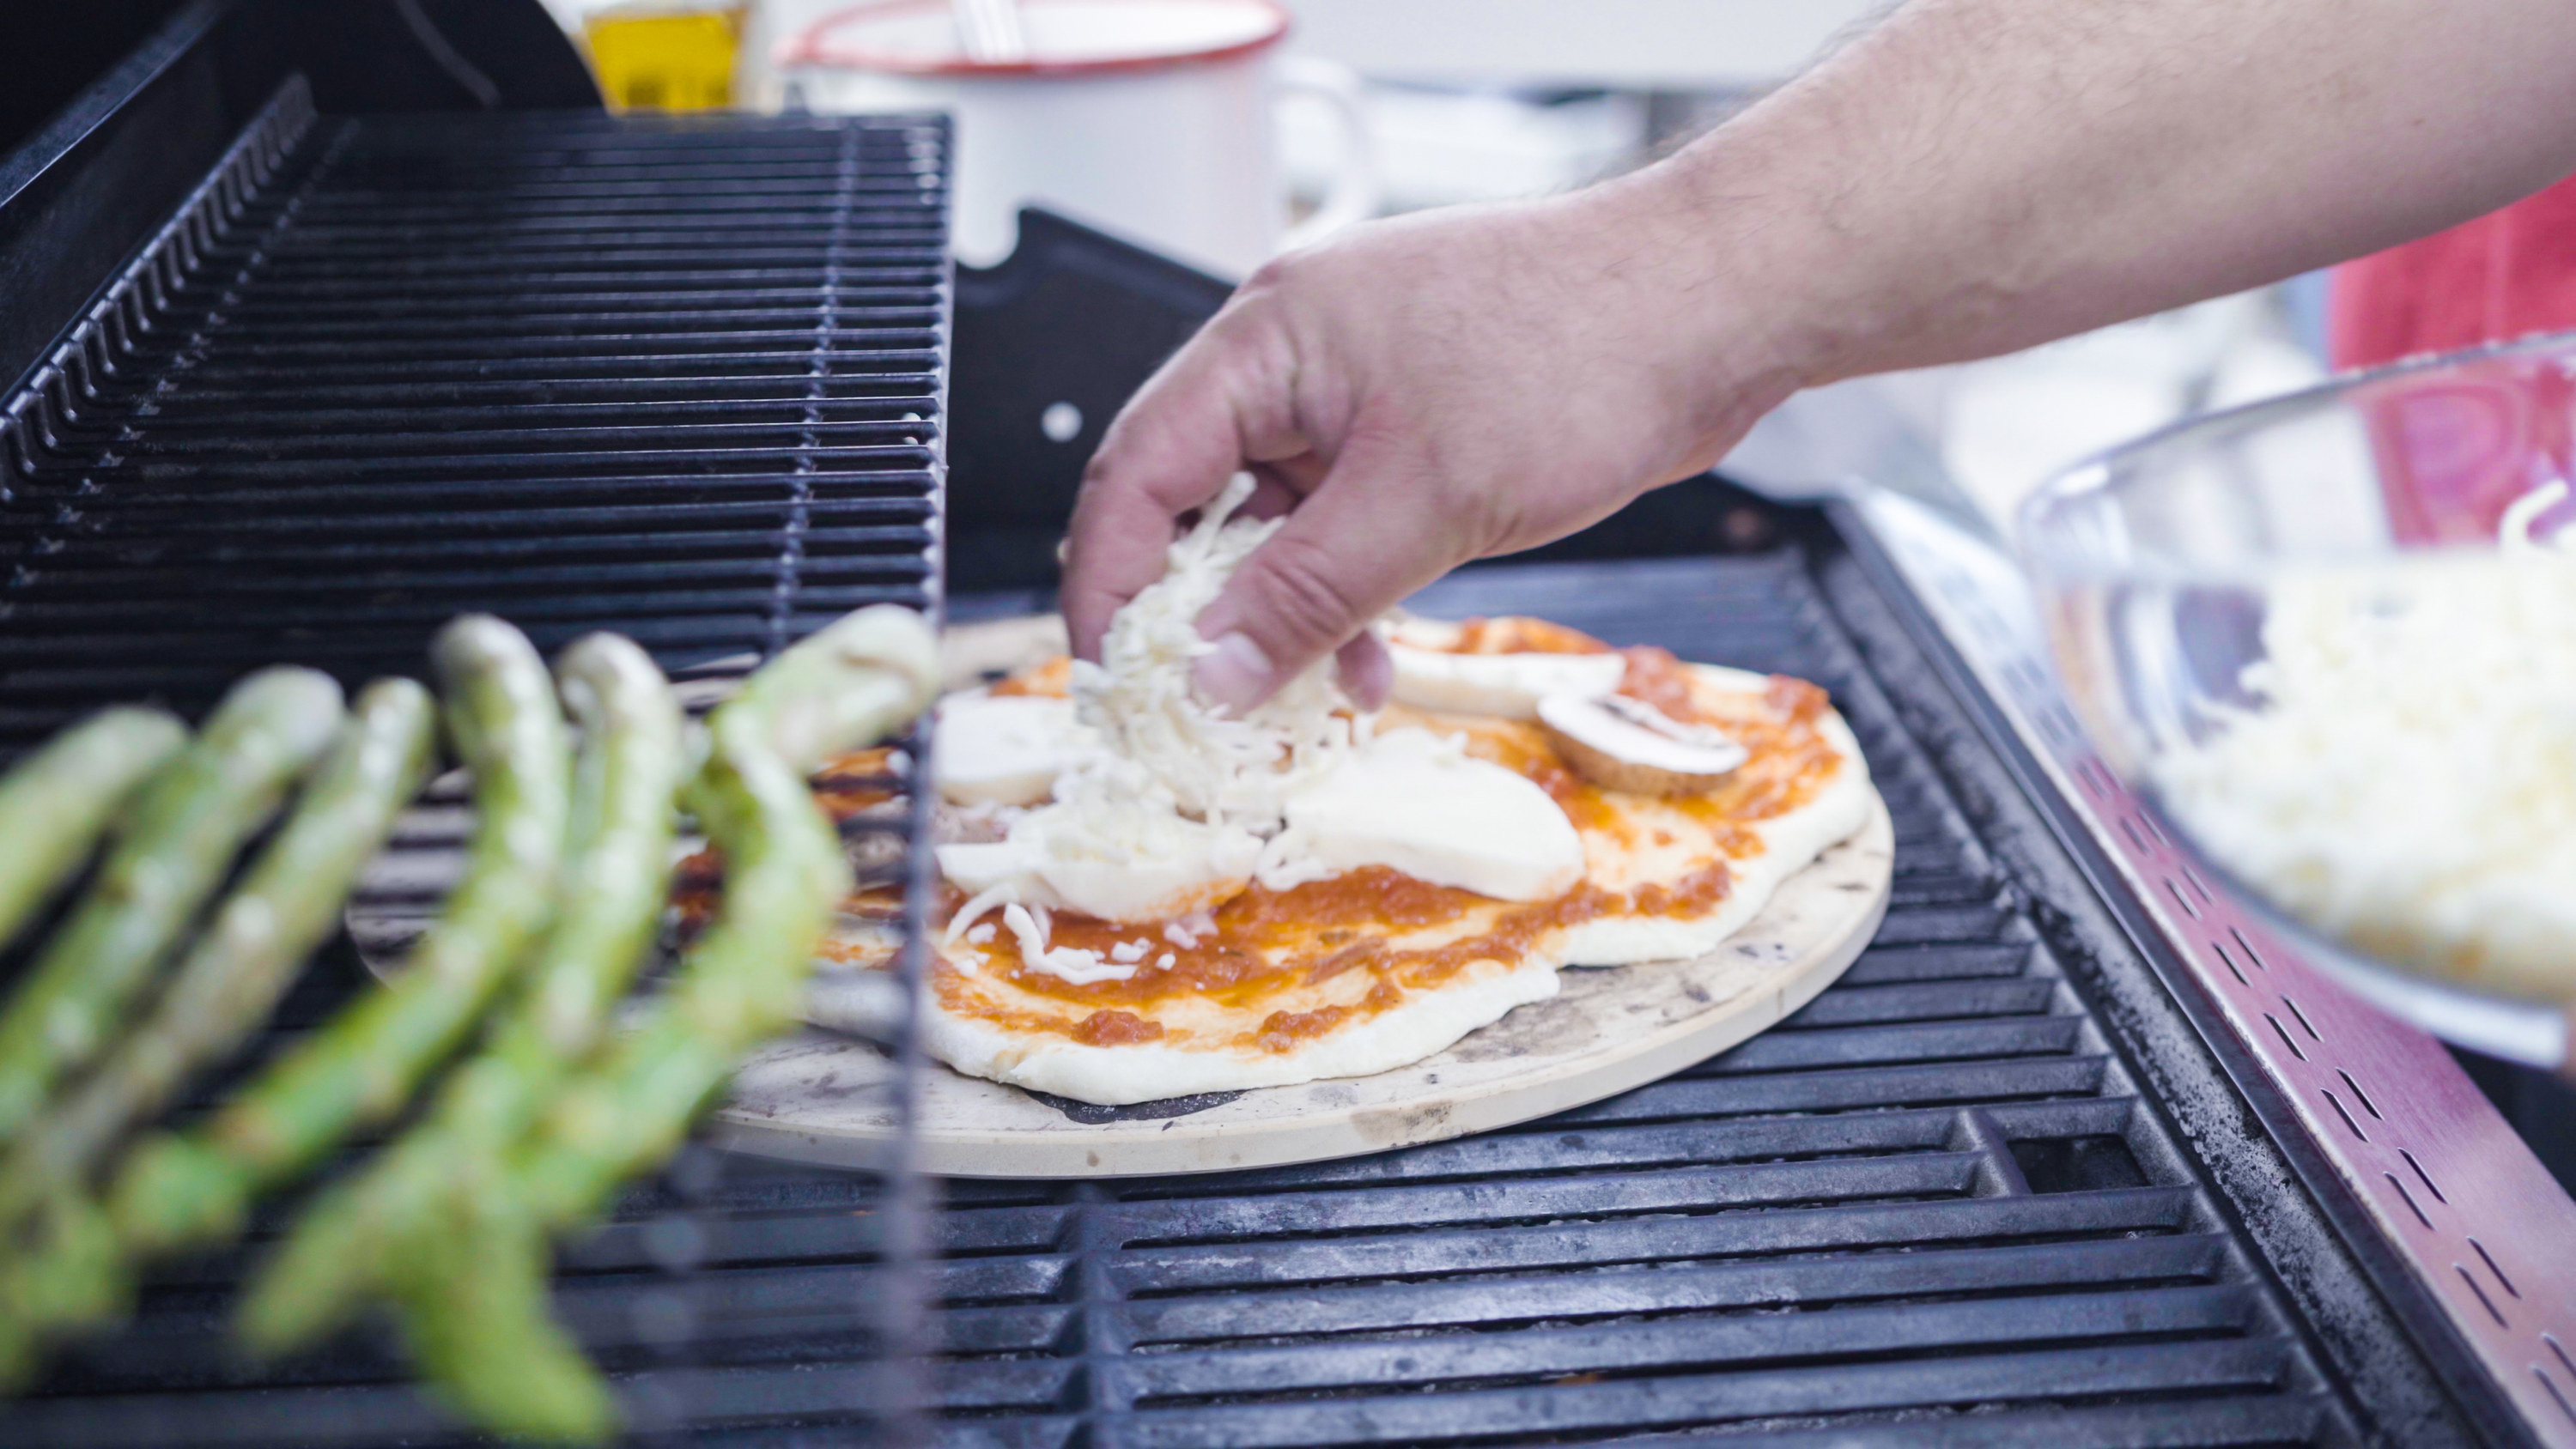 Grilling pizza on an outdoor bbq.